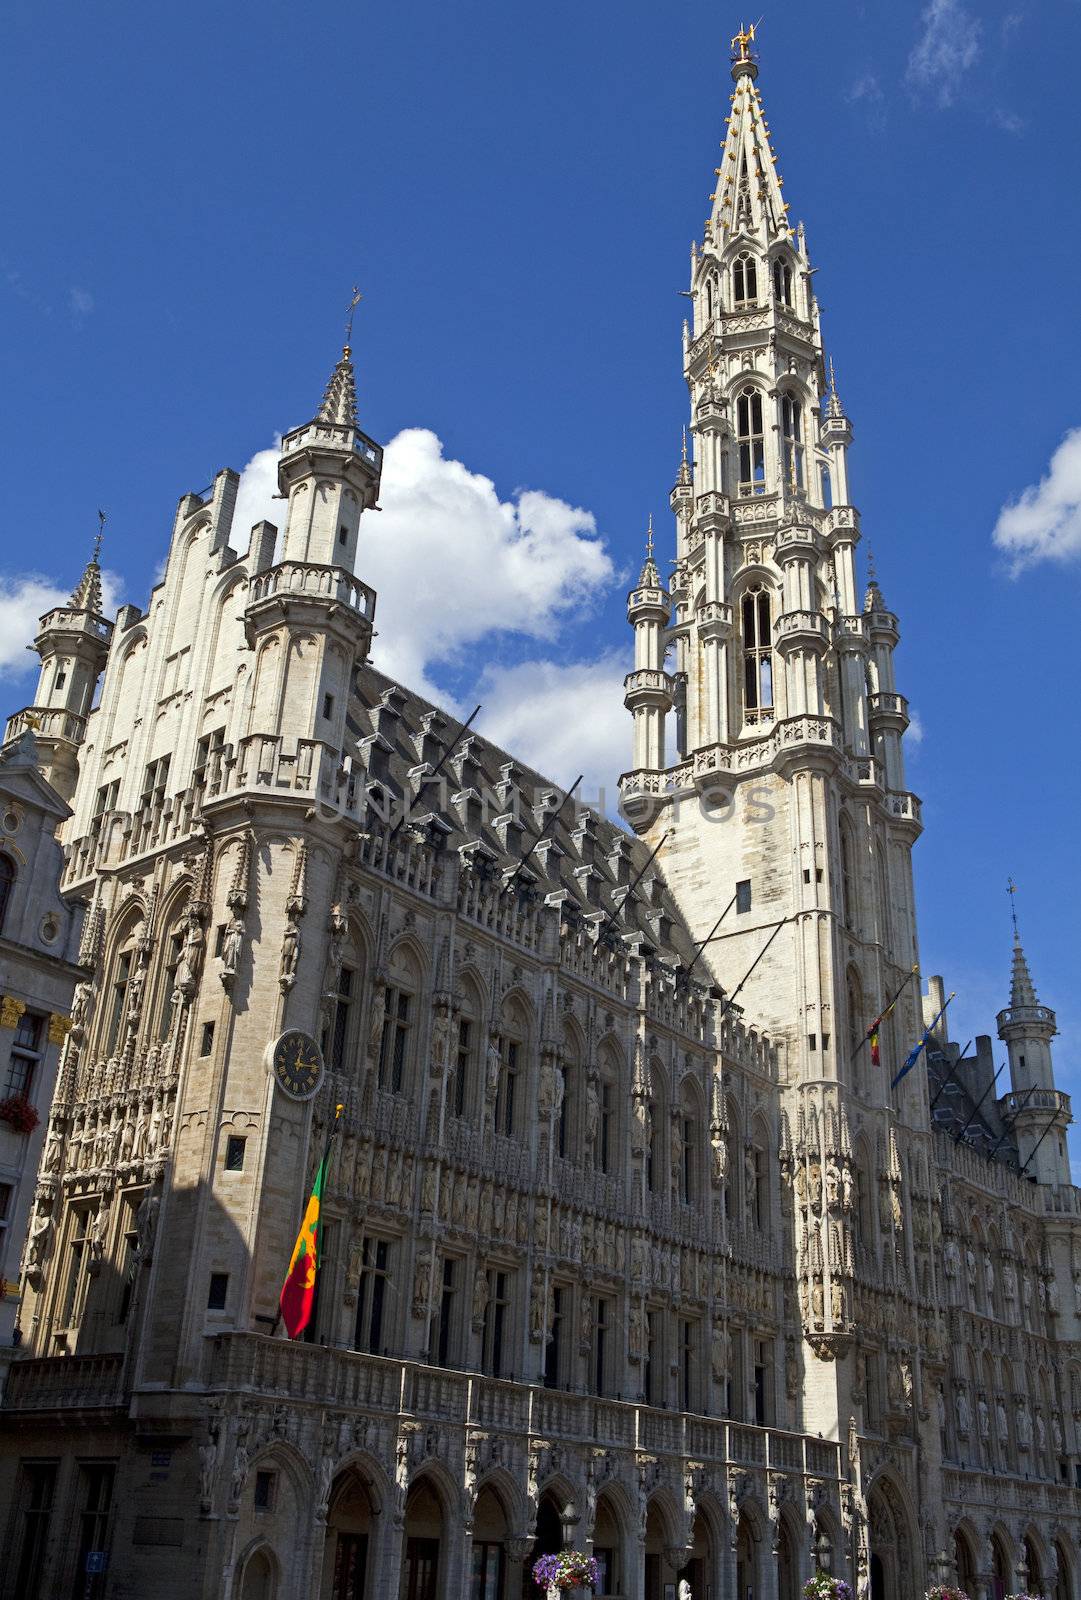 Brussels Town Hall situated on Grand Place.